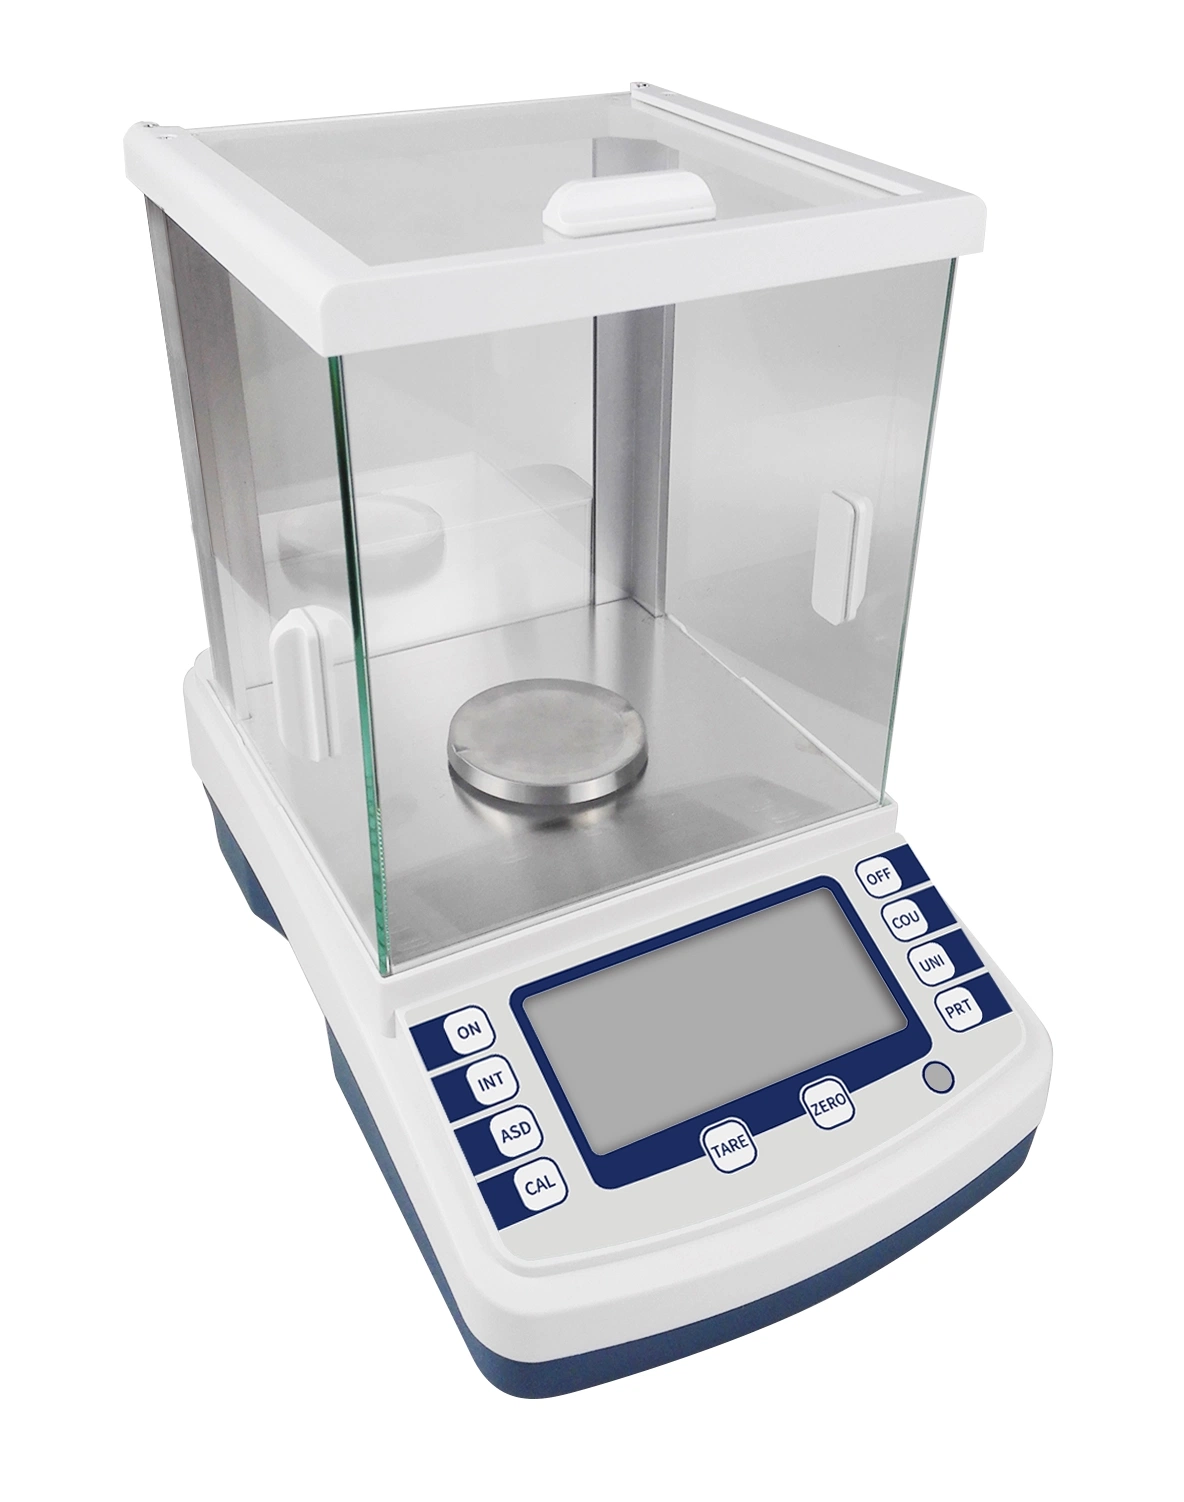 100g/0.1mg Laboratory High Speed Analytical Balance with External Calibration